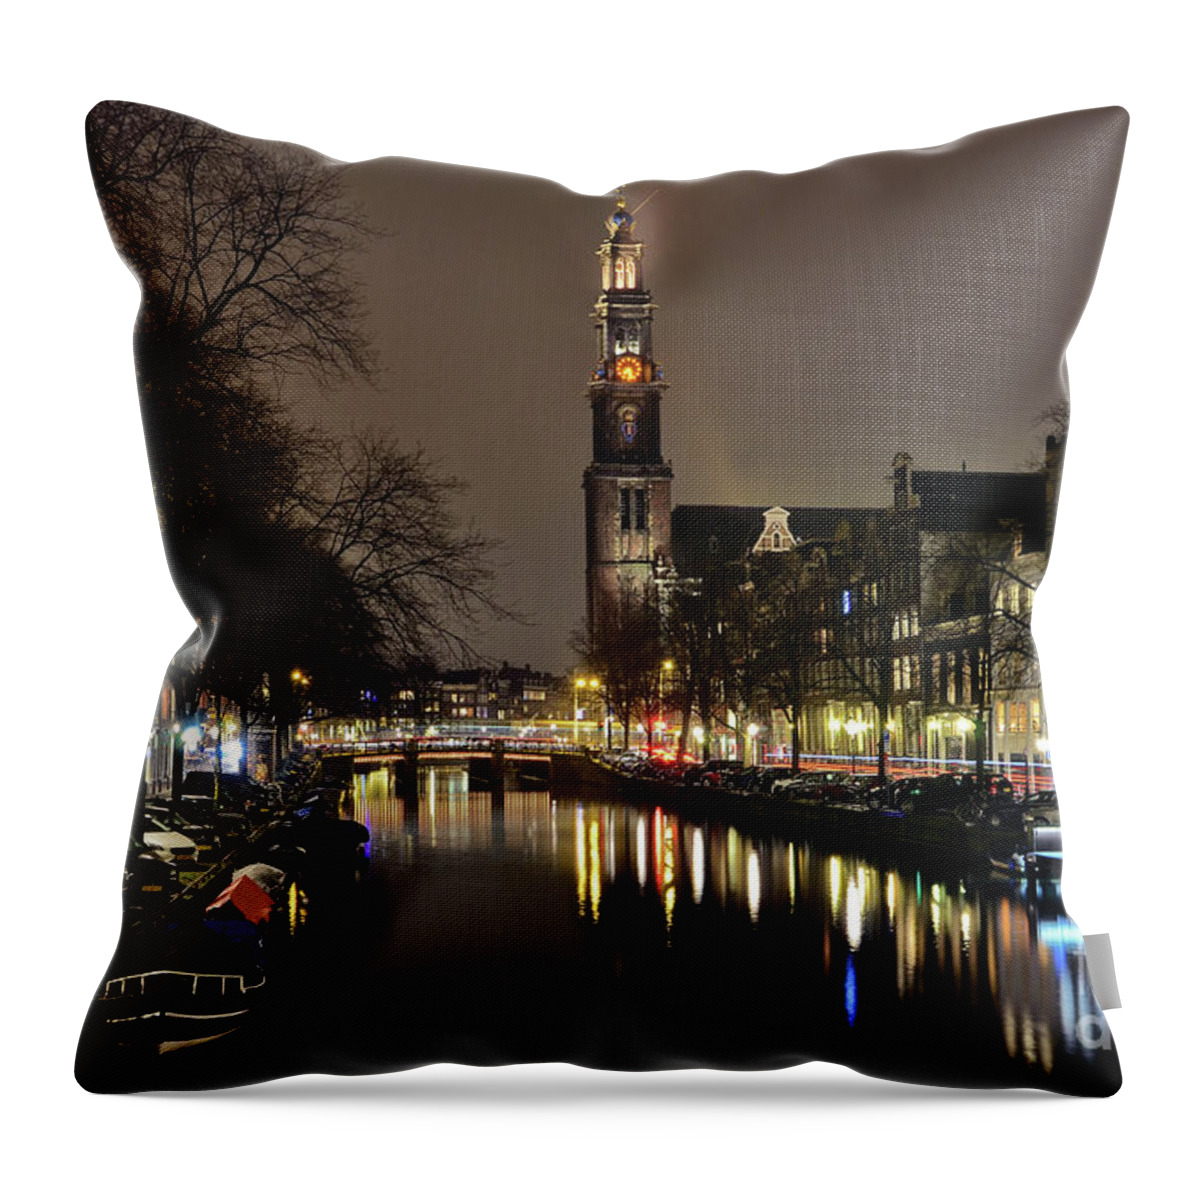 Canal Throw Pillow featuring the photograph Amsterdam by night - Prinsengracht by Carlos Alkmin